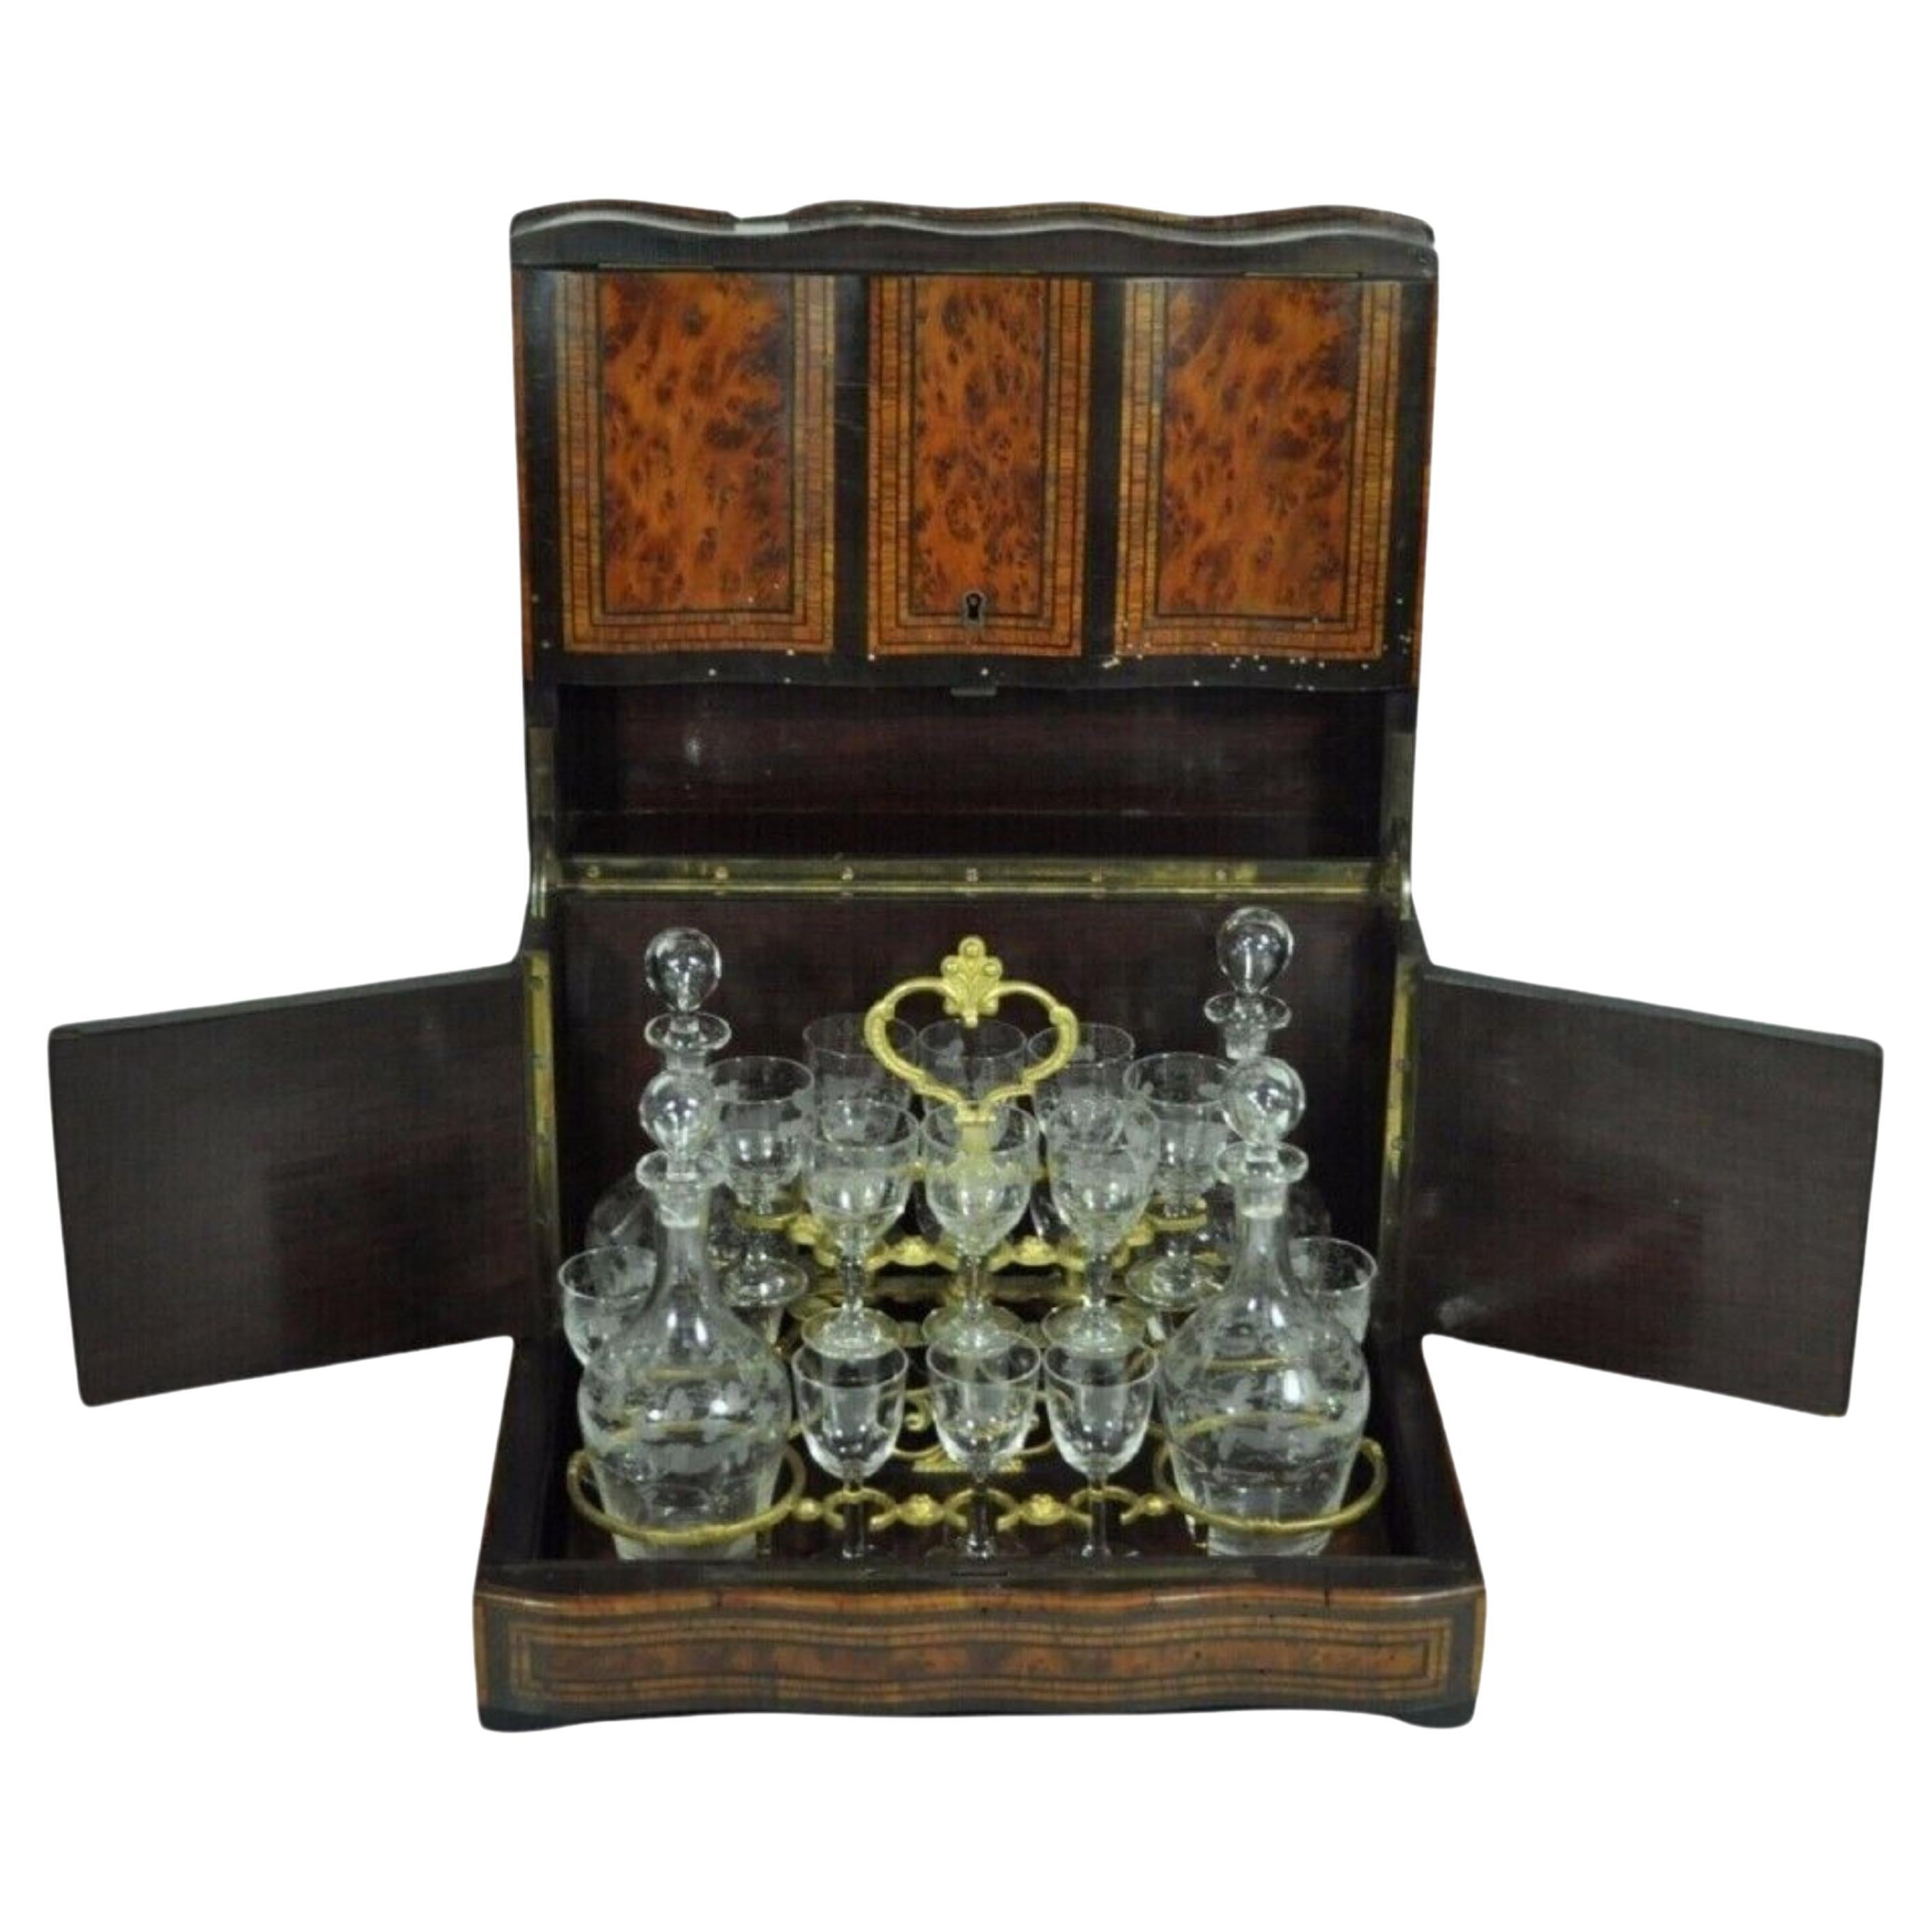 Antique French Brass Inlay Tantalus Box Cordial Decanter Set Liquor Cabinet